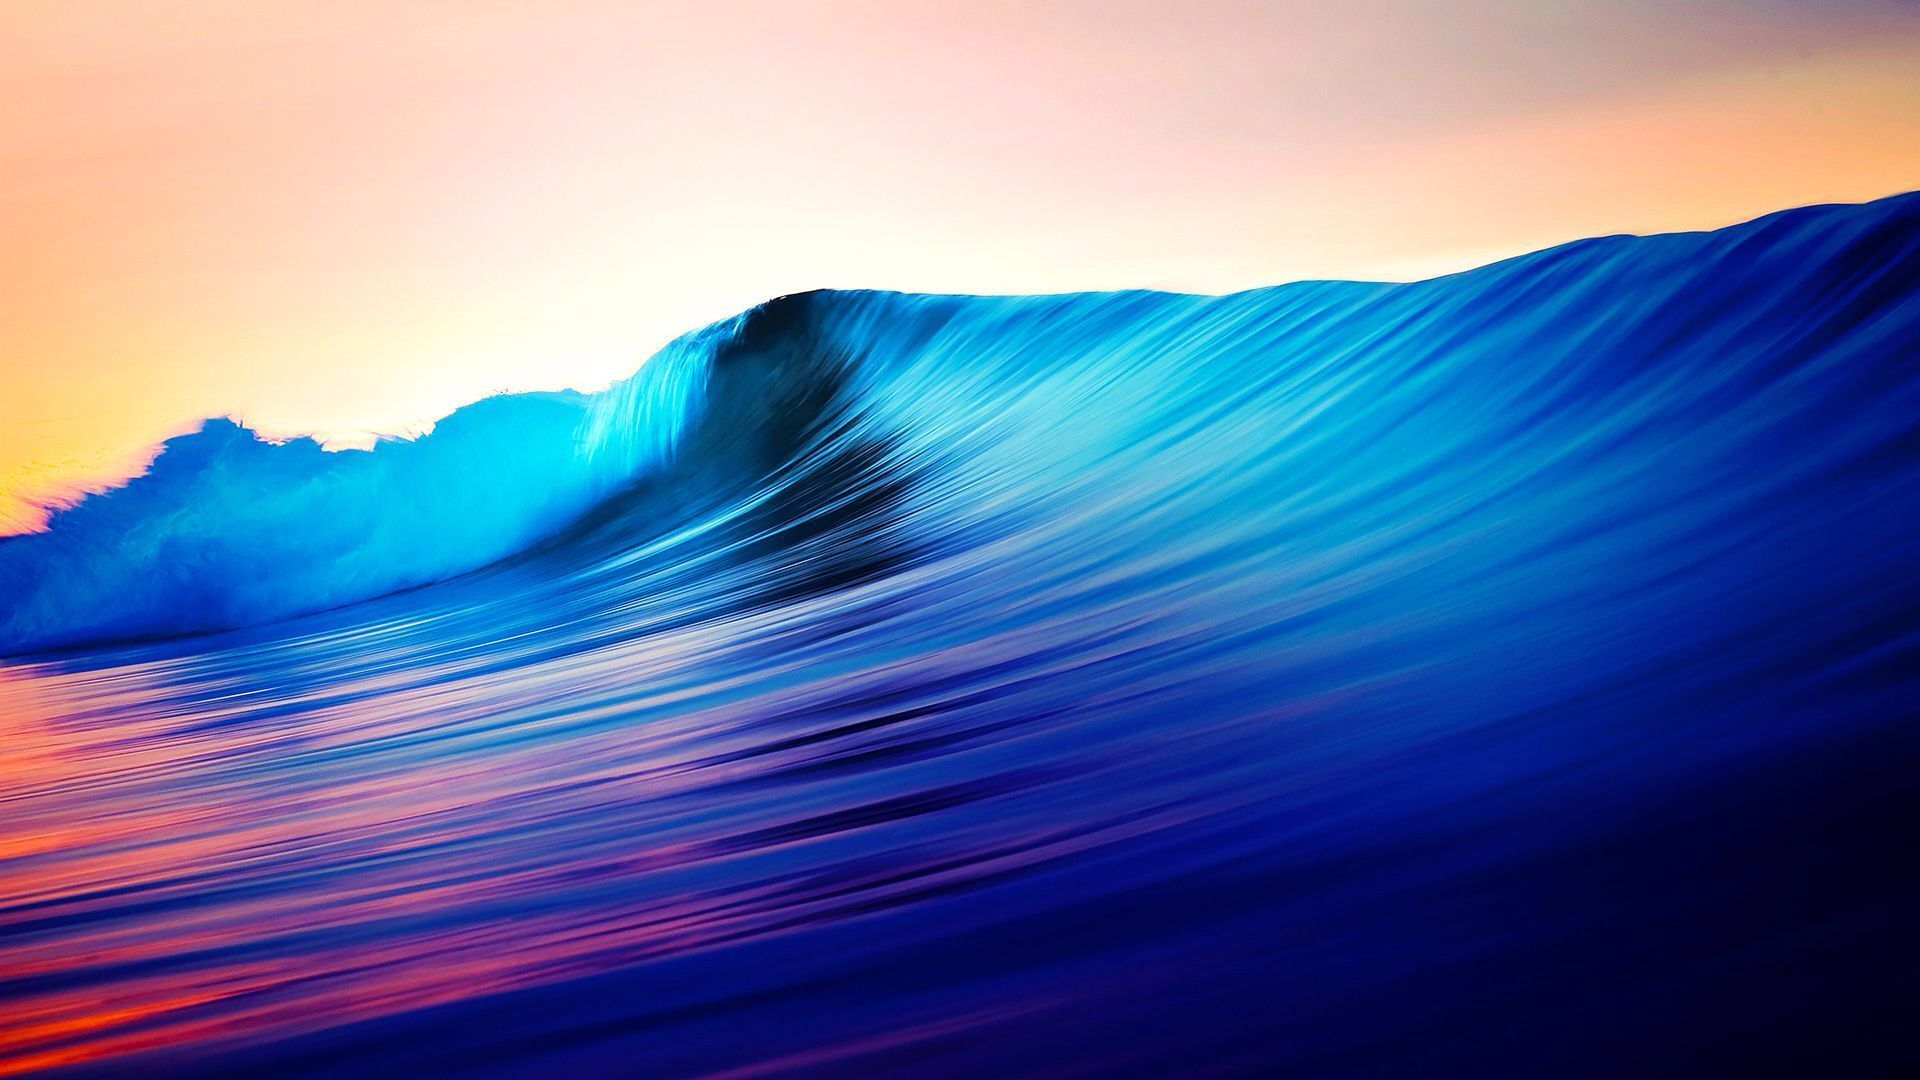 Image _media Wallpaper_1920x1080 1 2 Colorful Waves